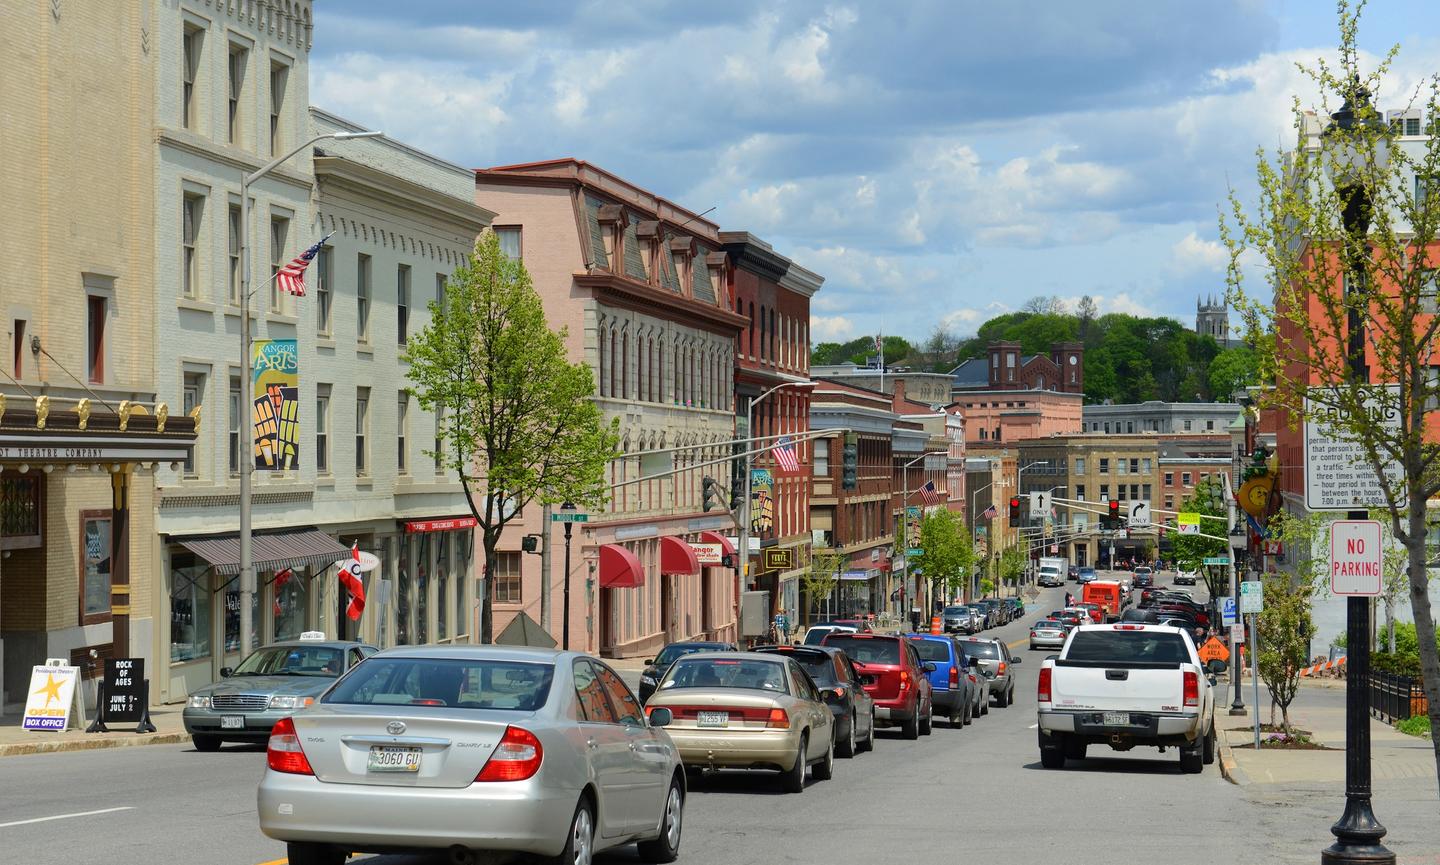 Main Street in downtown Bangor offers a diverse mix of dining, shopping, and art galleries.